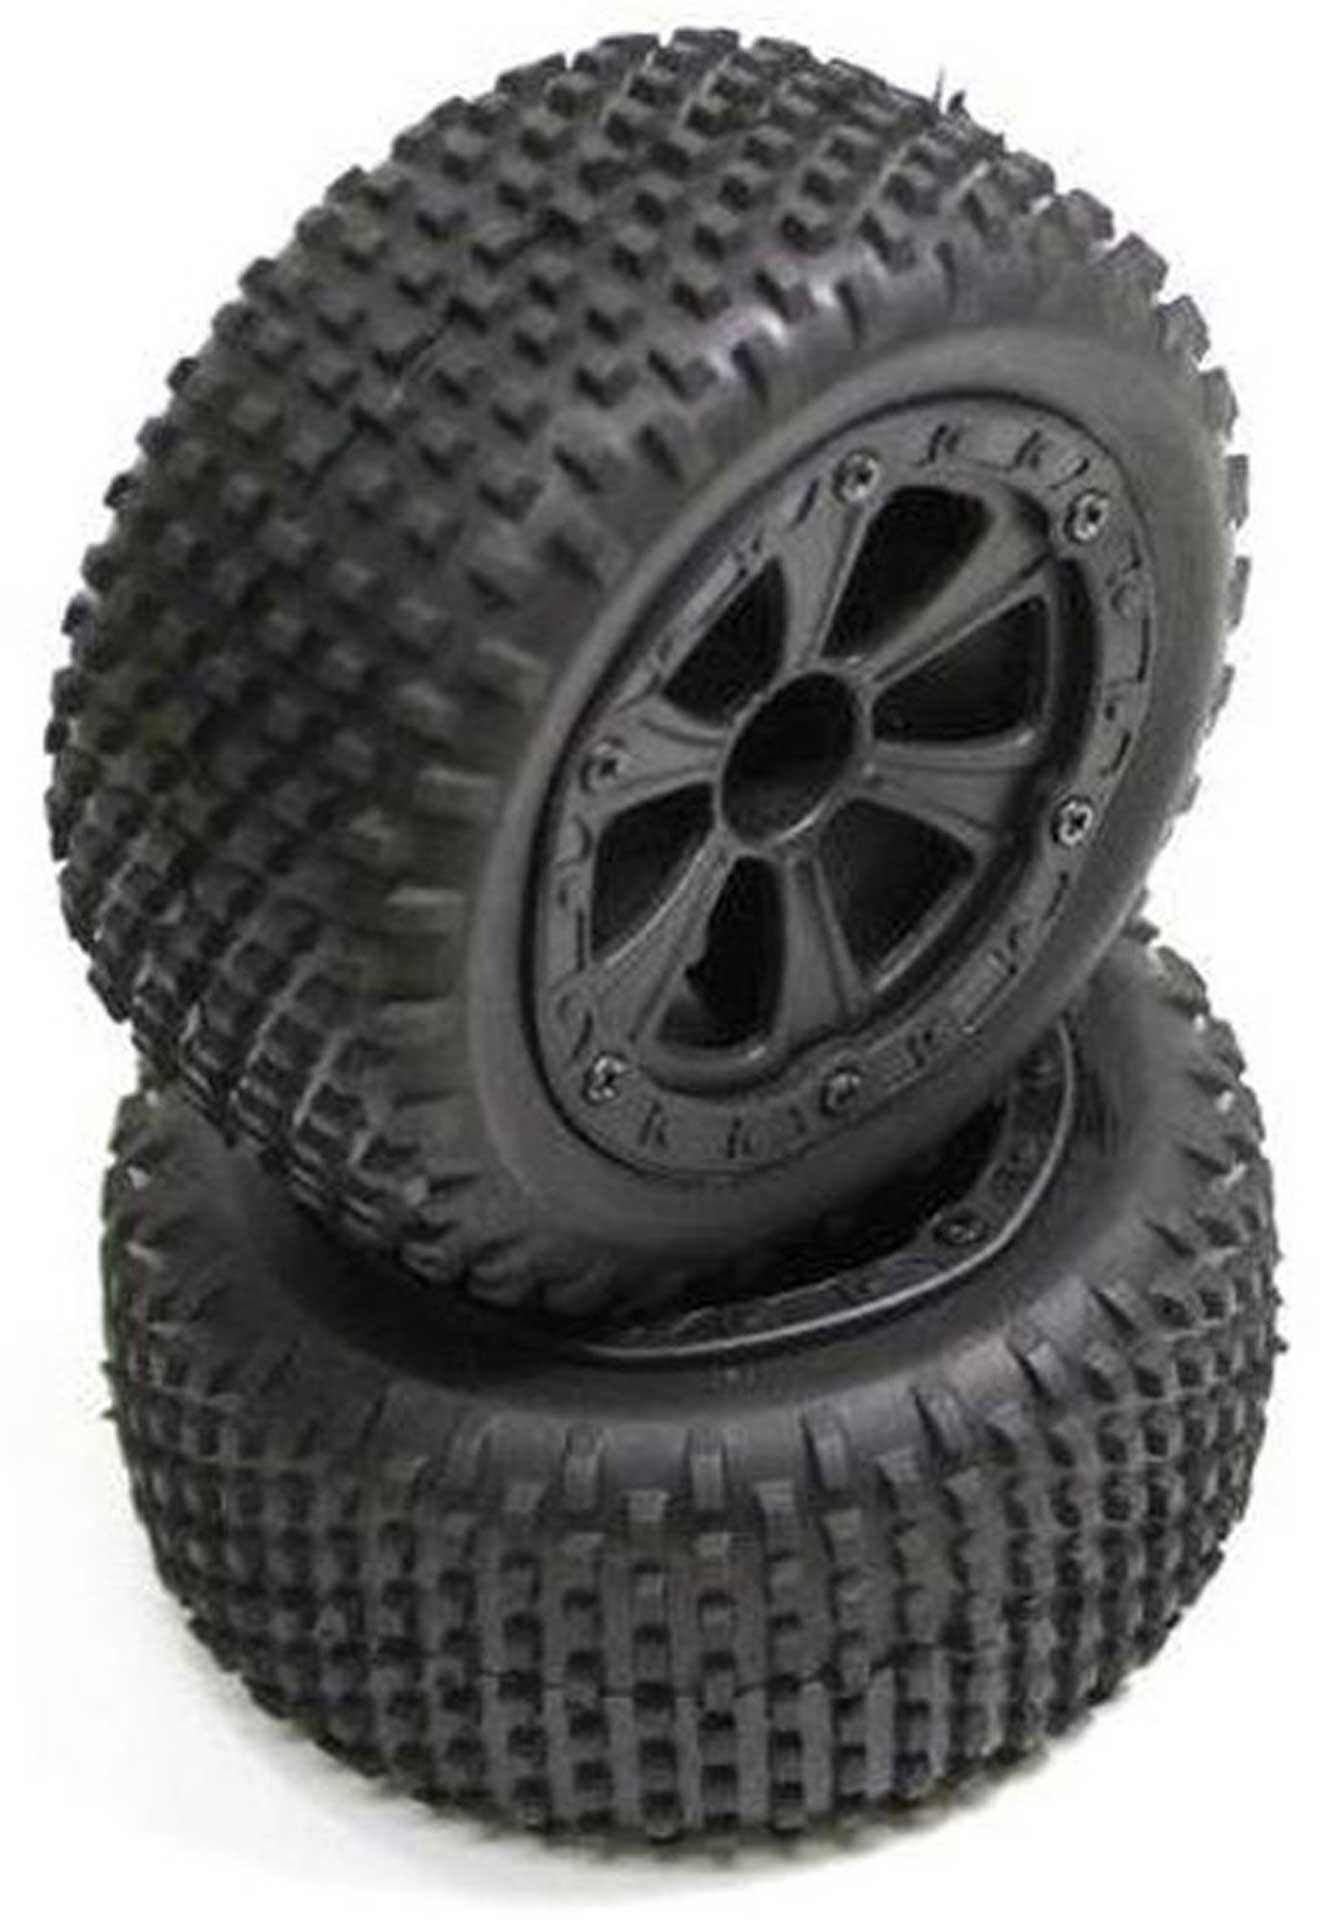 ABSIMA TIRES COMPLETE  REAR (2) 1:10 HOT SHOT BUGGY